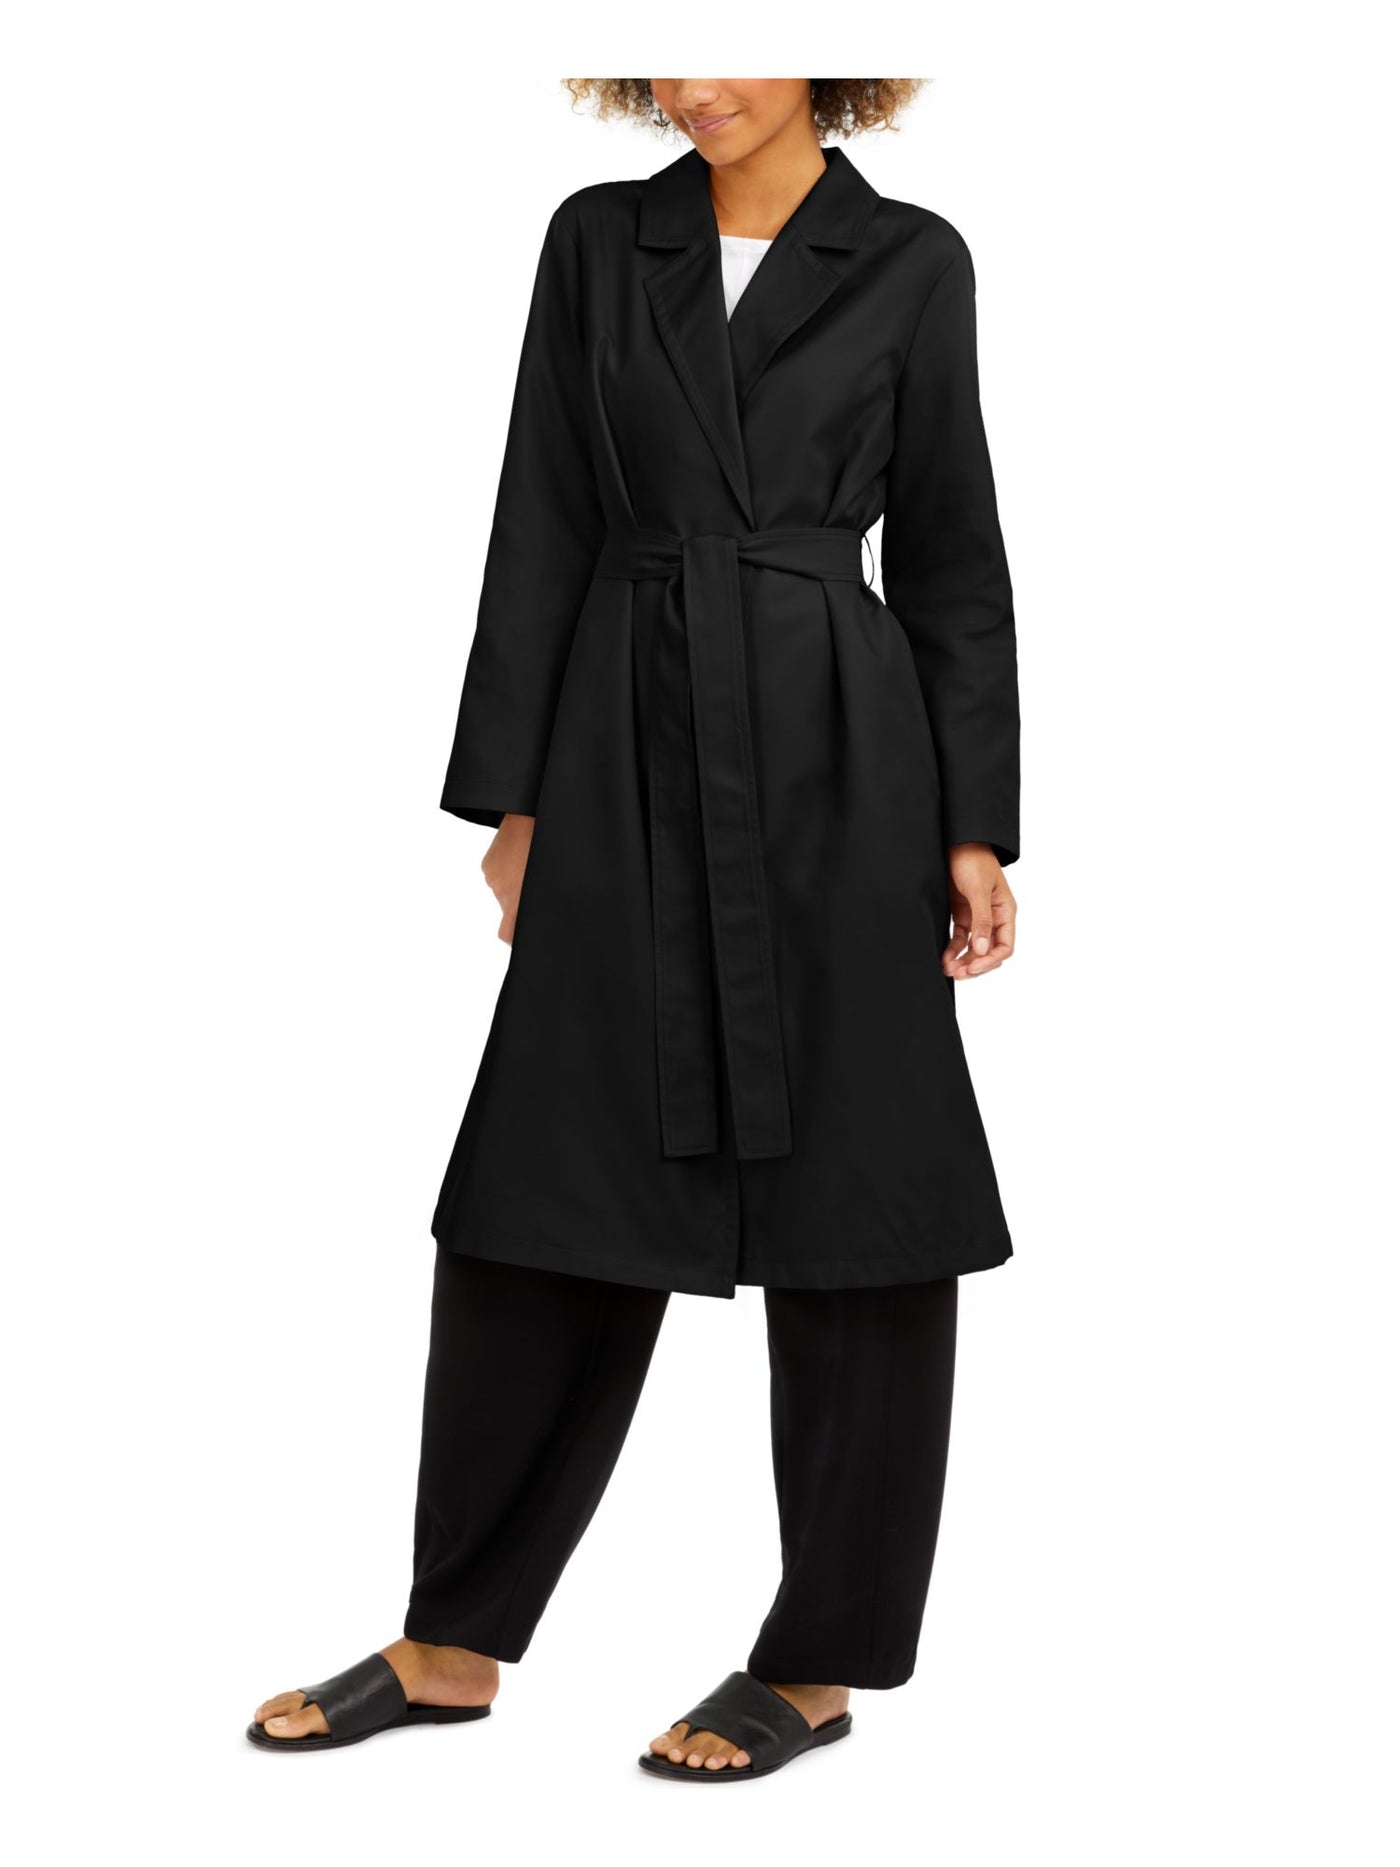 EILEEN FISHER Womens Black Belted Pocketed Trench Coat L